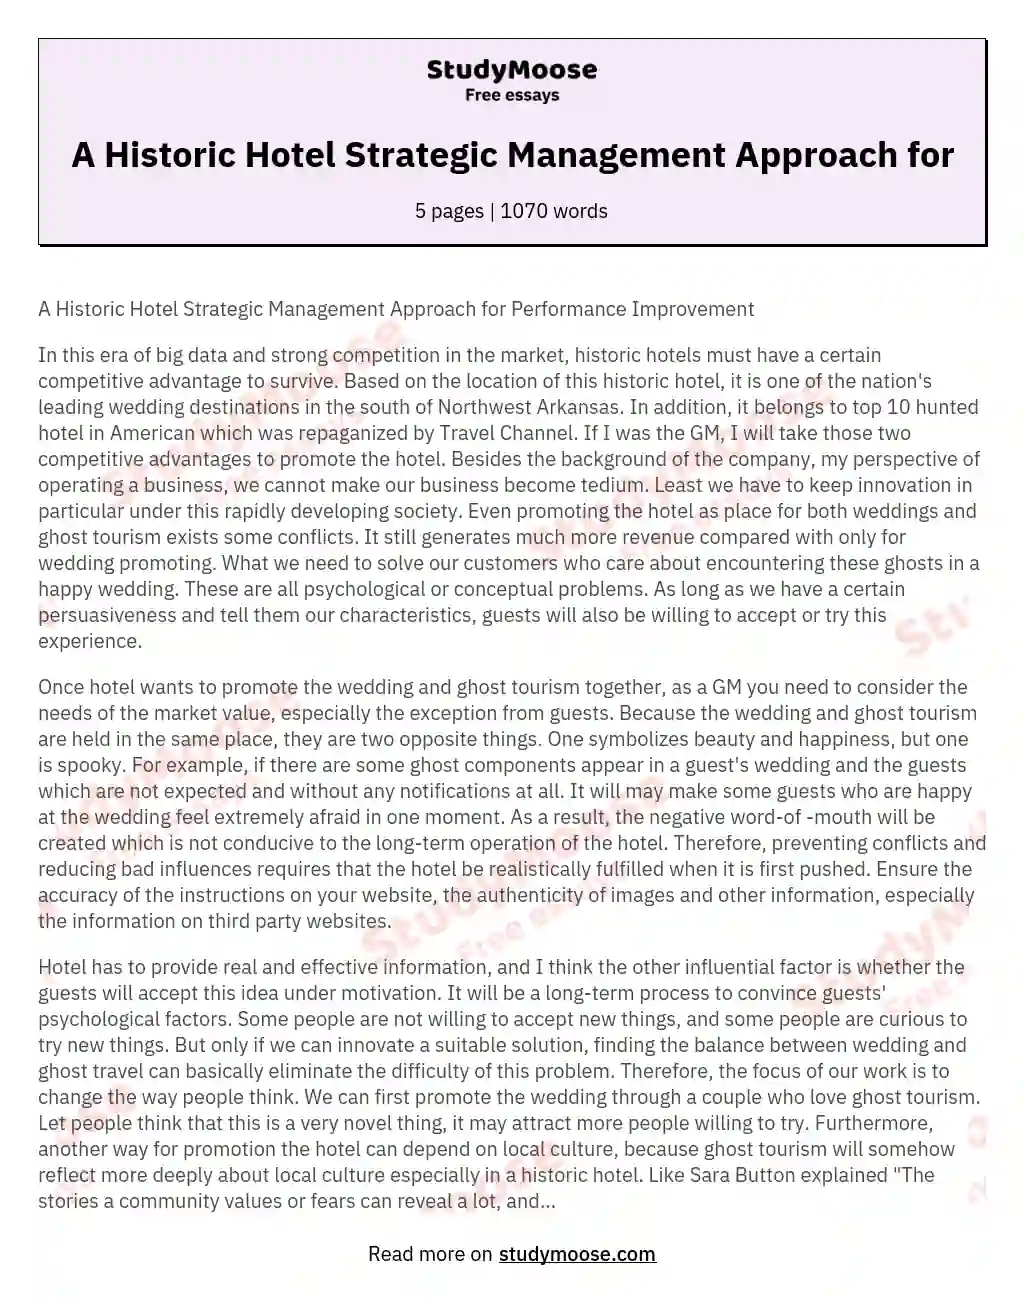 A Historic Hotel Strategic Management Approach for essay